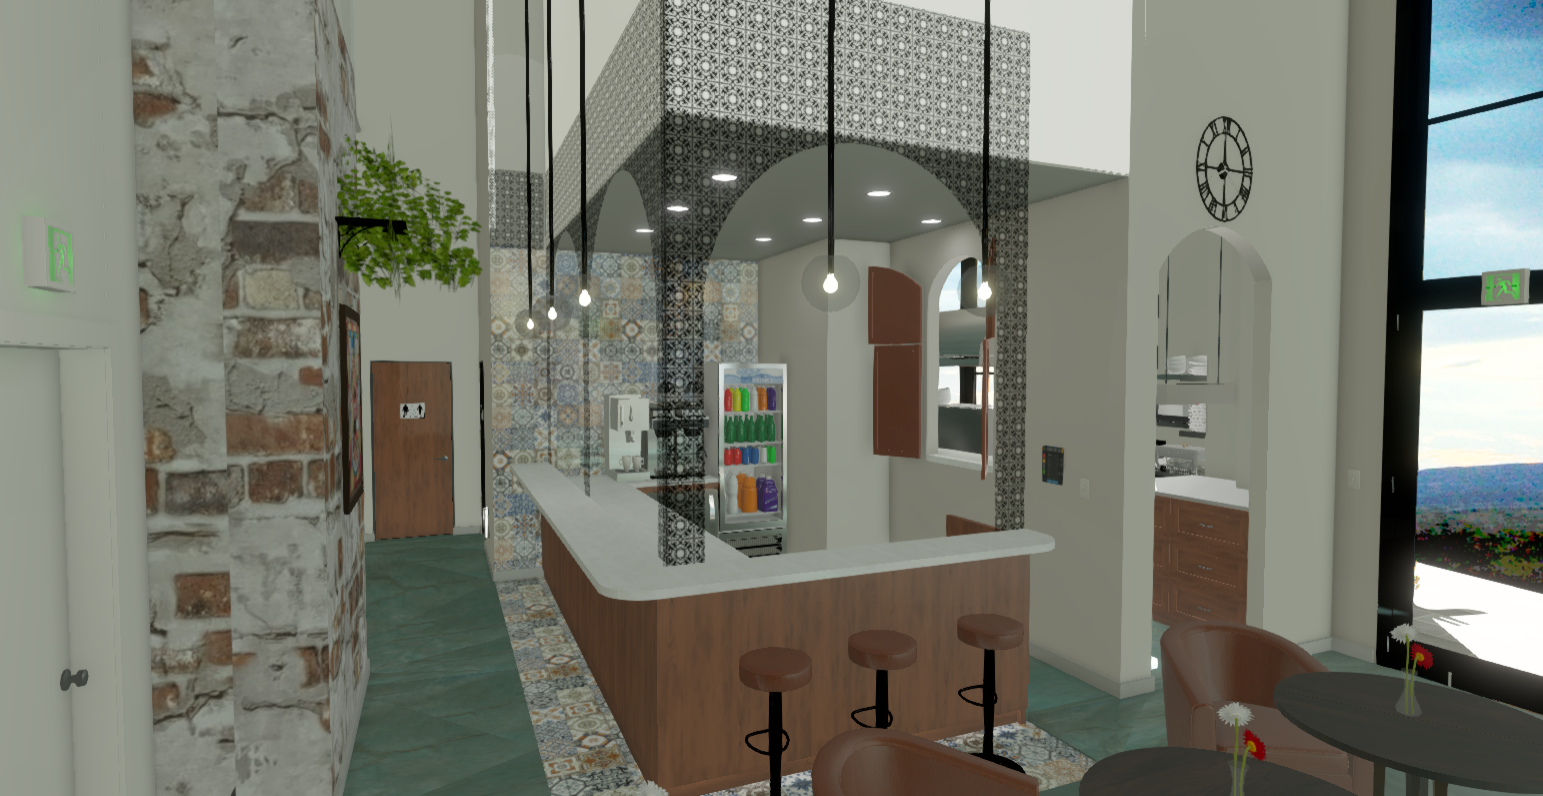 An animated render of the new Soul de Cuba restaurant bar with white and grey tile, stonework, aqua colour accents and modern furnishing, designed by Creative Touch Interiors.